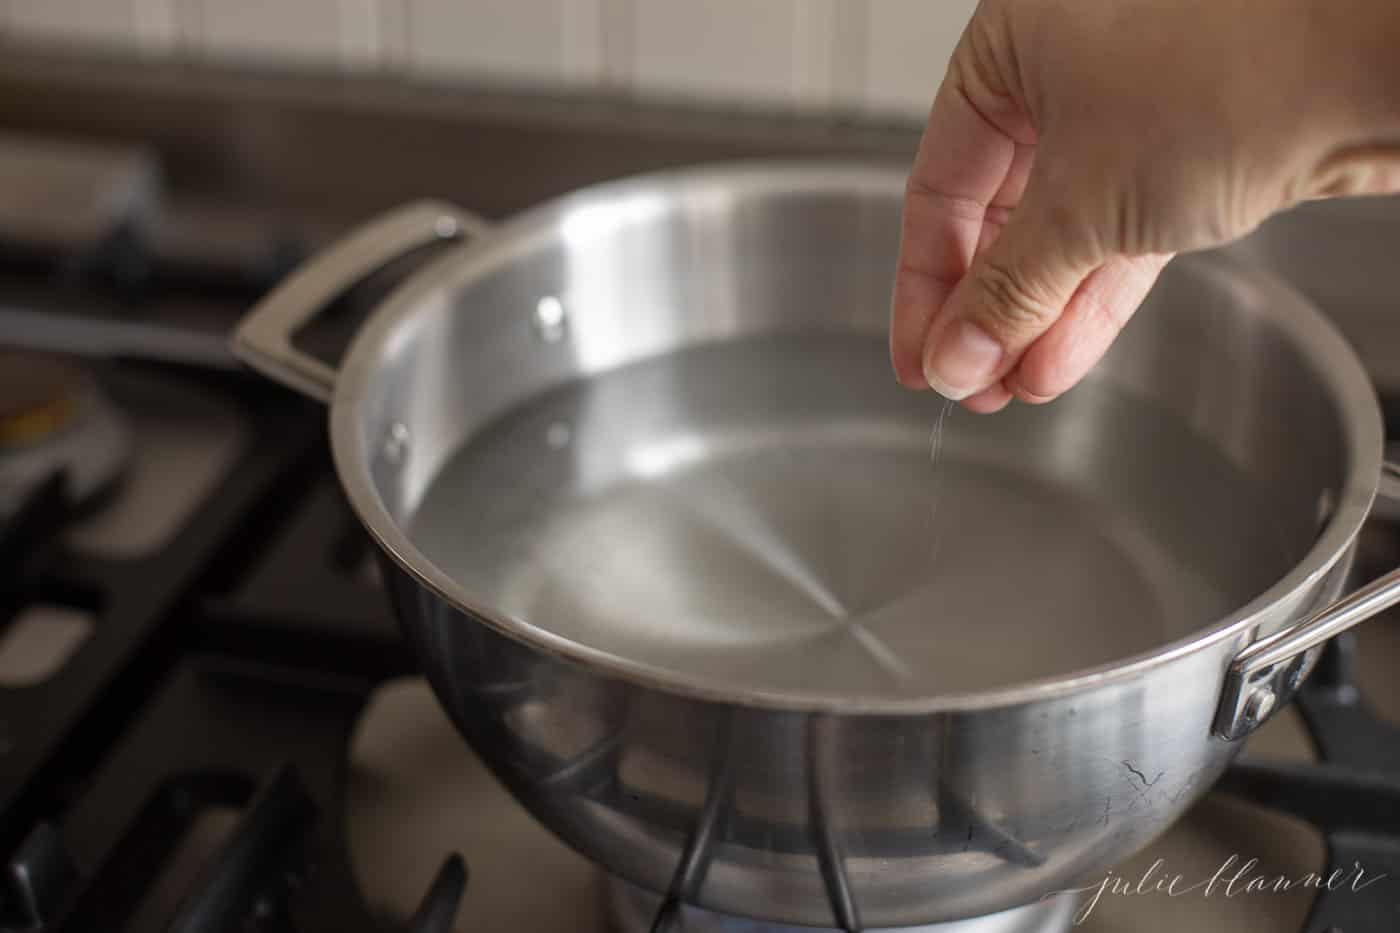 A silver pot full of water on the stove, hand reaching in with salt.